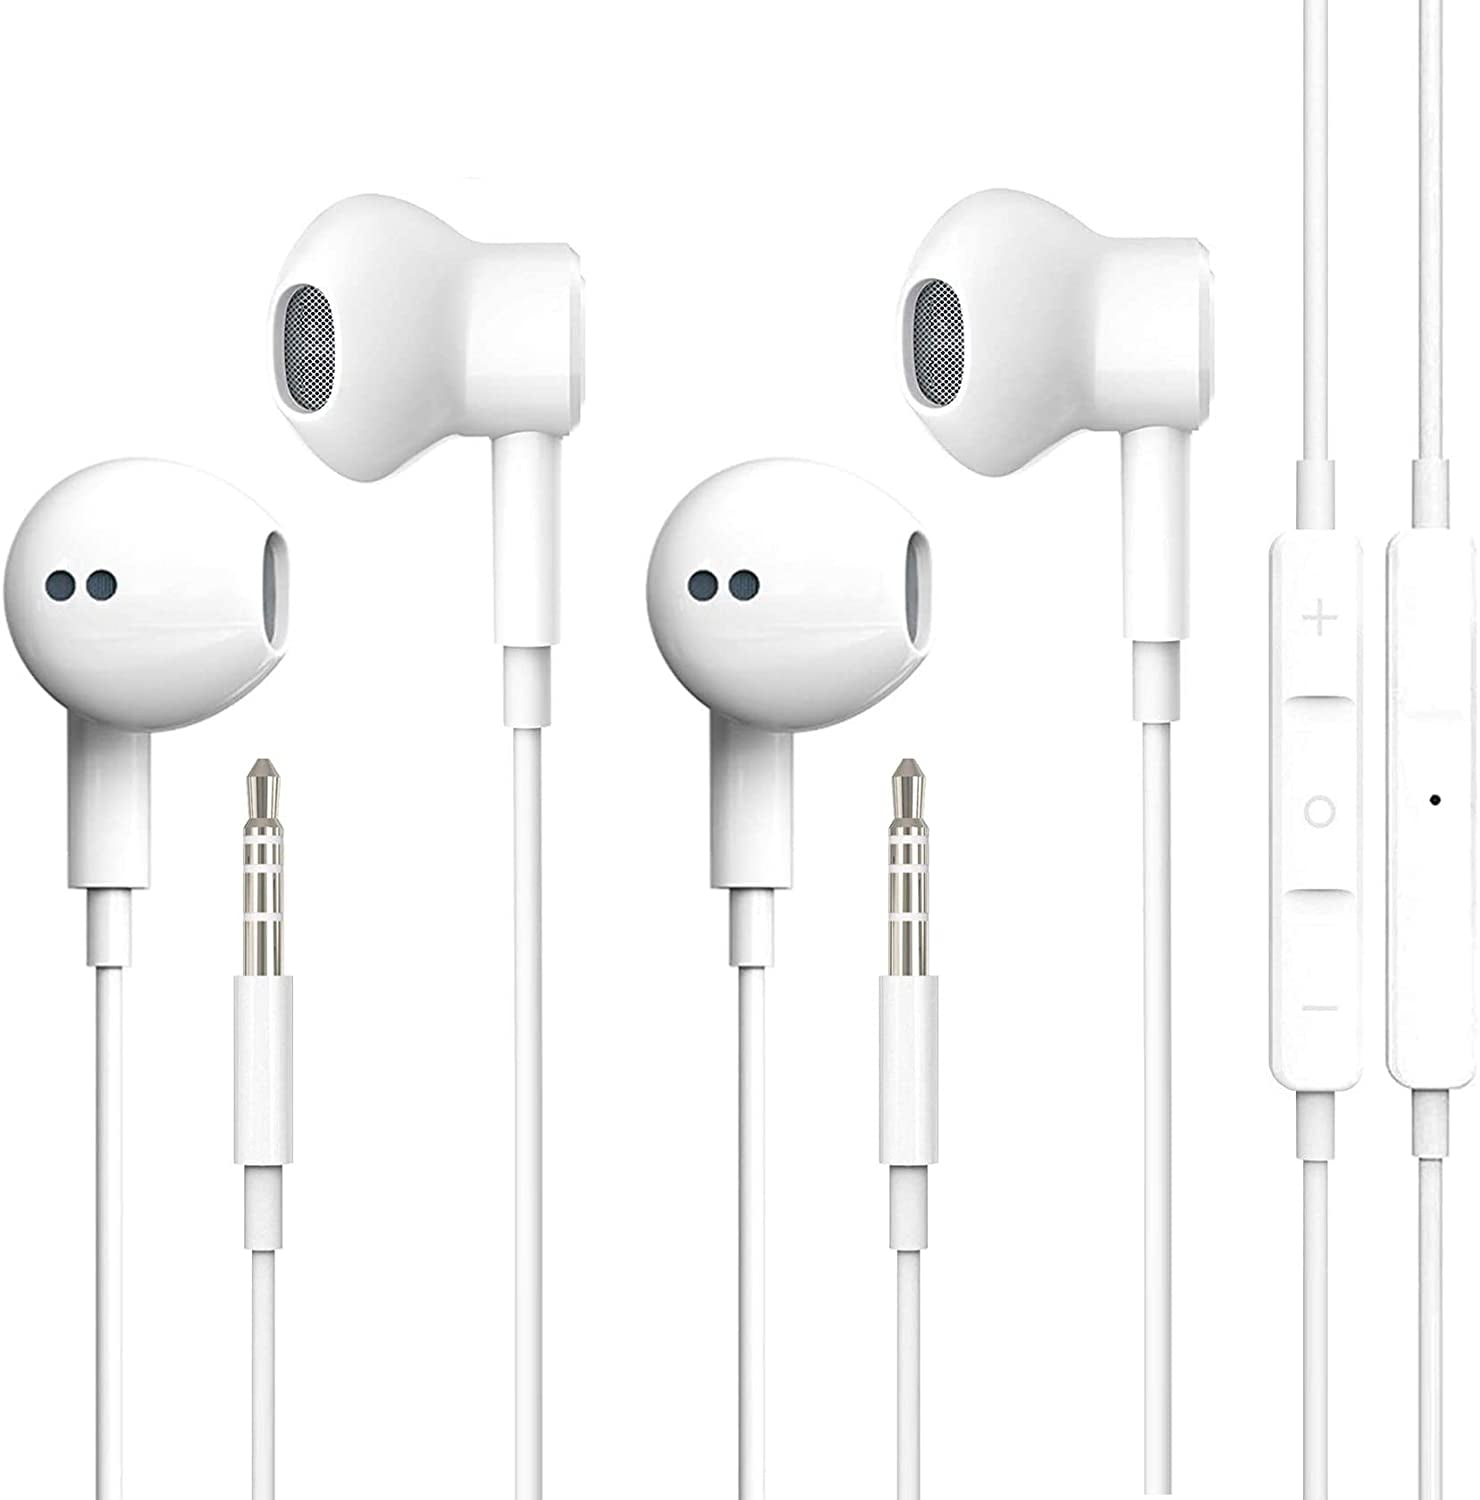 White 2Pack Earbuds/Earphones/Headphones Premium in-Ear Wired Earphones with Remote & Mic Compatible Apple iPhone 6s/plus/6/5s/se/5c/iPad/Samsung/MP3 